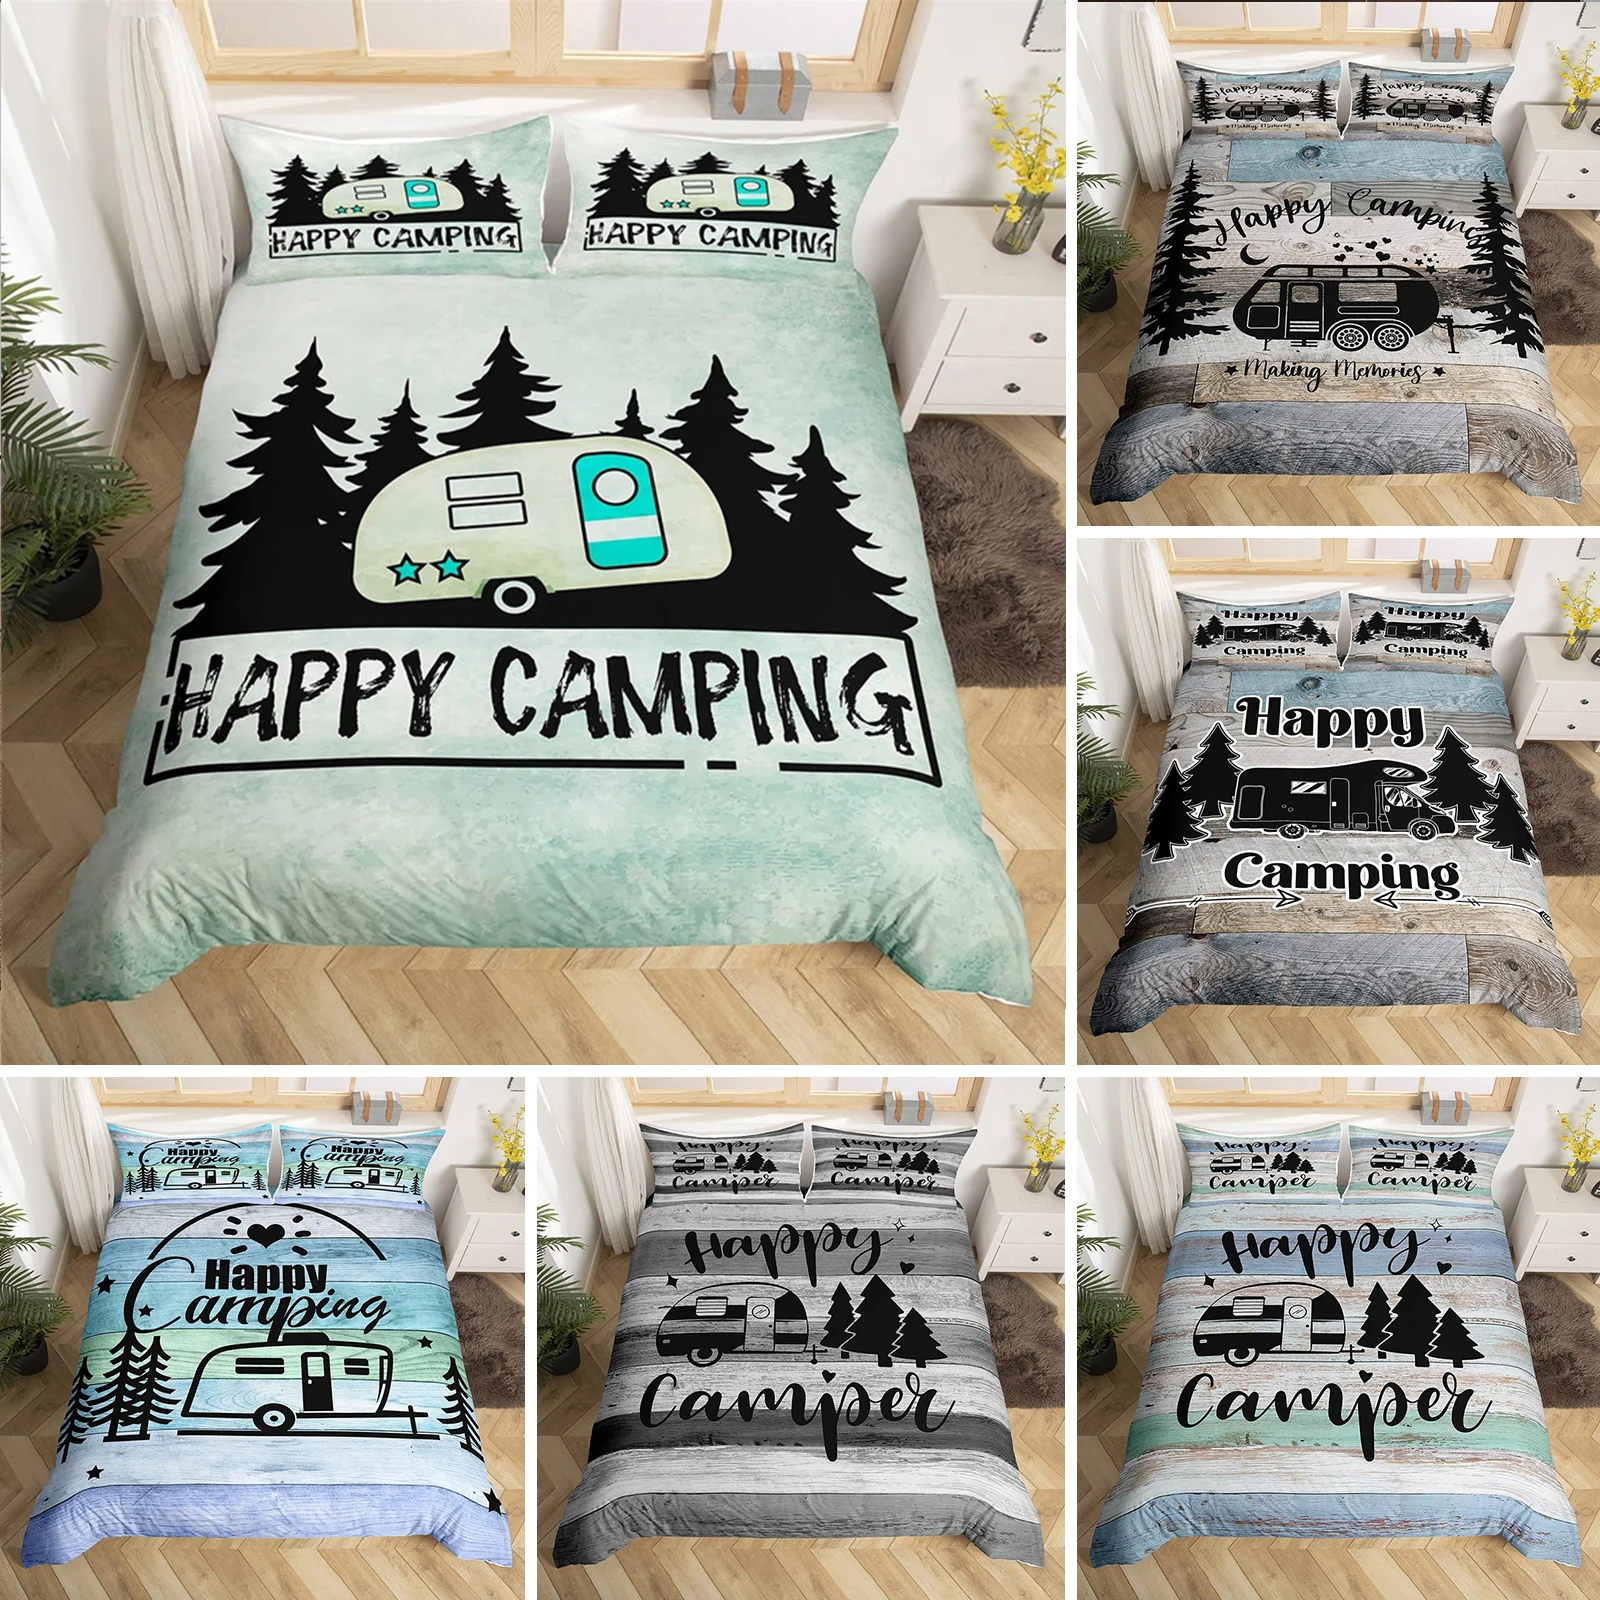 

Happy Camping Duvet Cover Queen Cartoon Caravan Camping Bedding Set Farmhouse Style 3D Camper Comforter Cover With Pillowcases